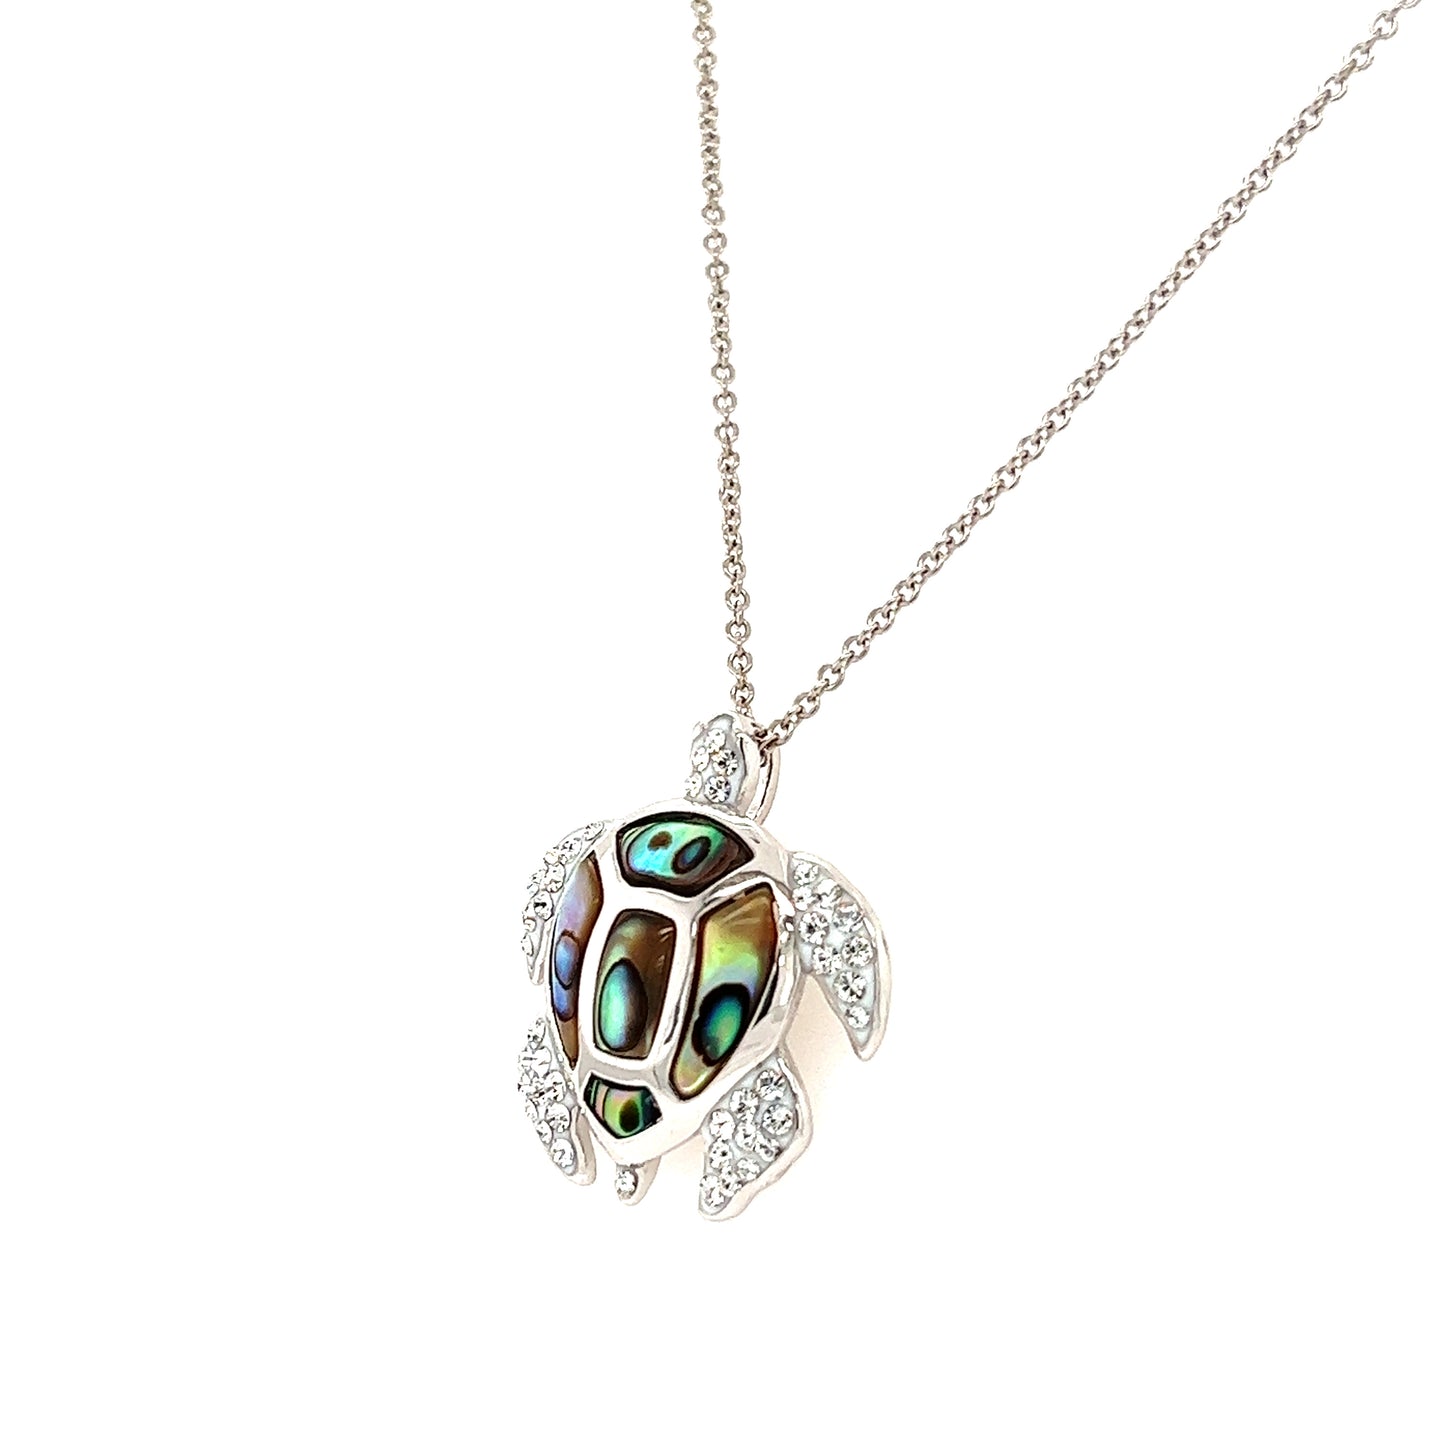 Sea Turtle Necklace with Abalone Shell Accents and White Crystals in Sterling Silver Right Side View